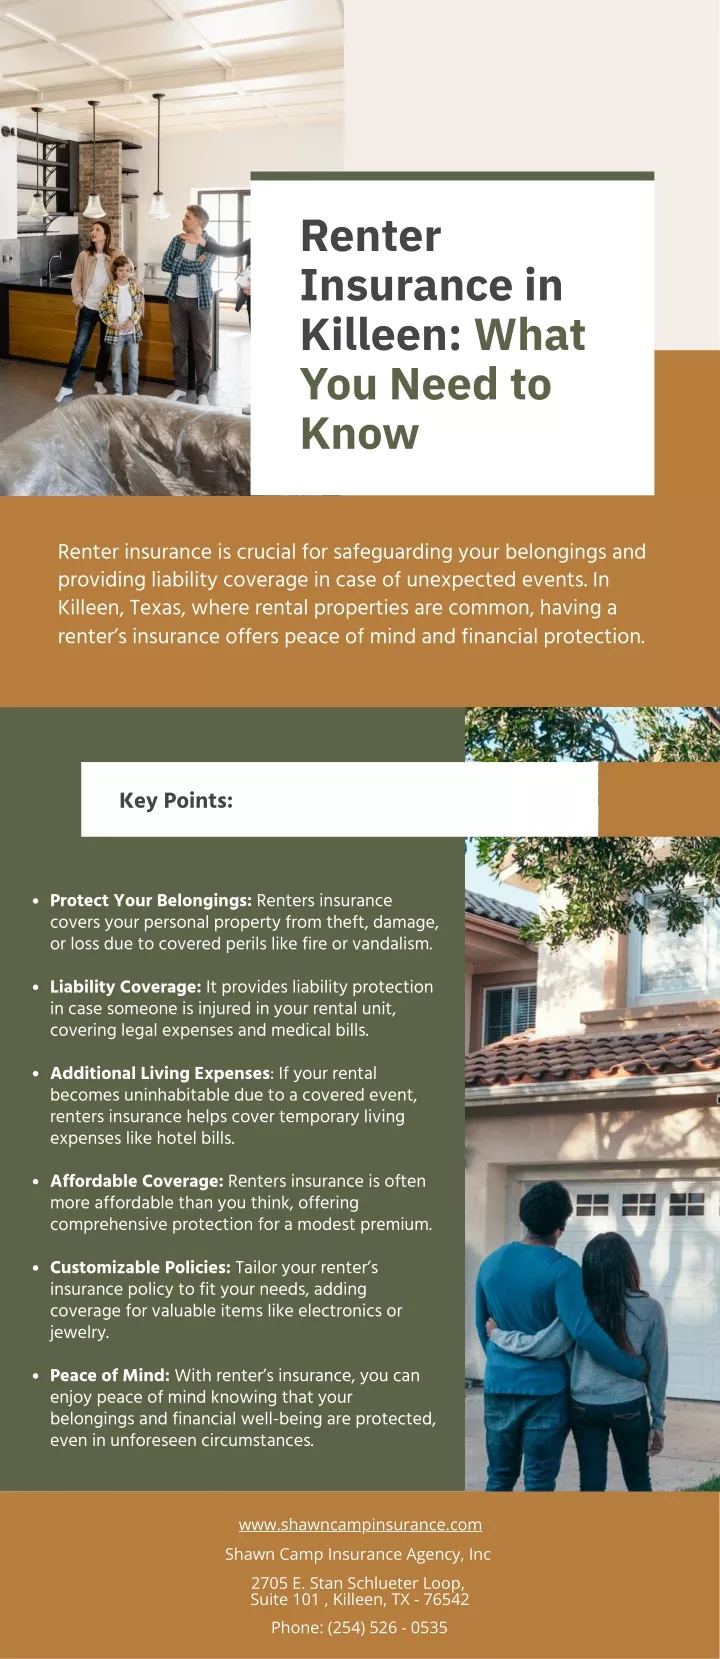 renter insurance in killeen what you need to know